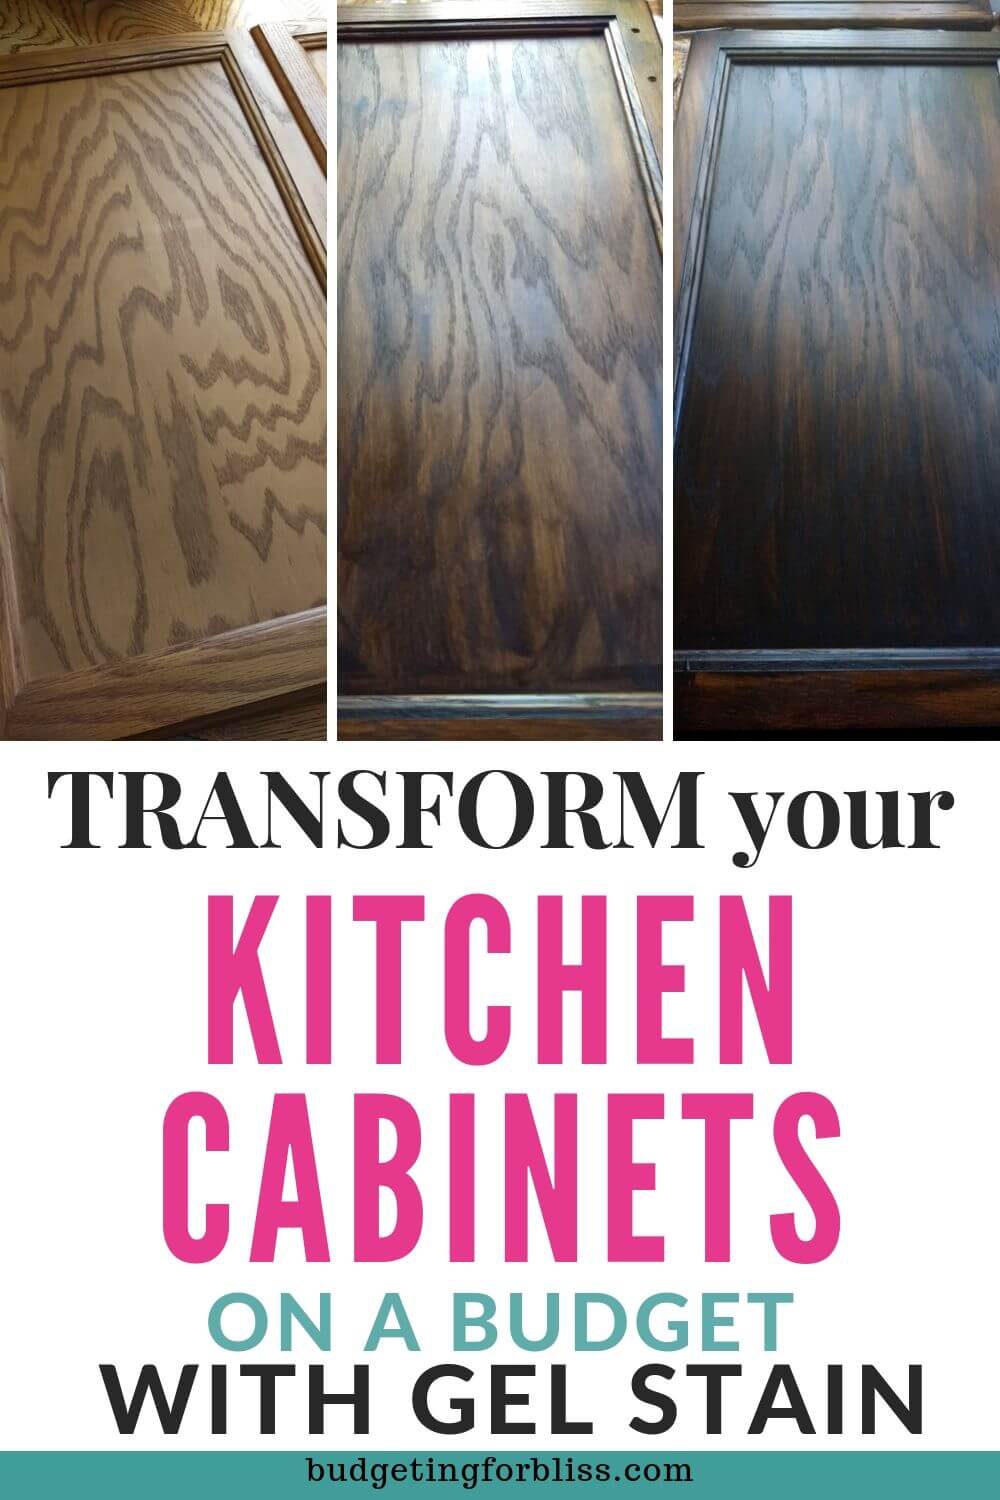 Update your cabinets with gel stain